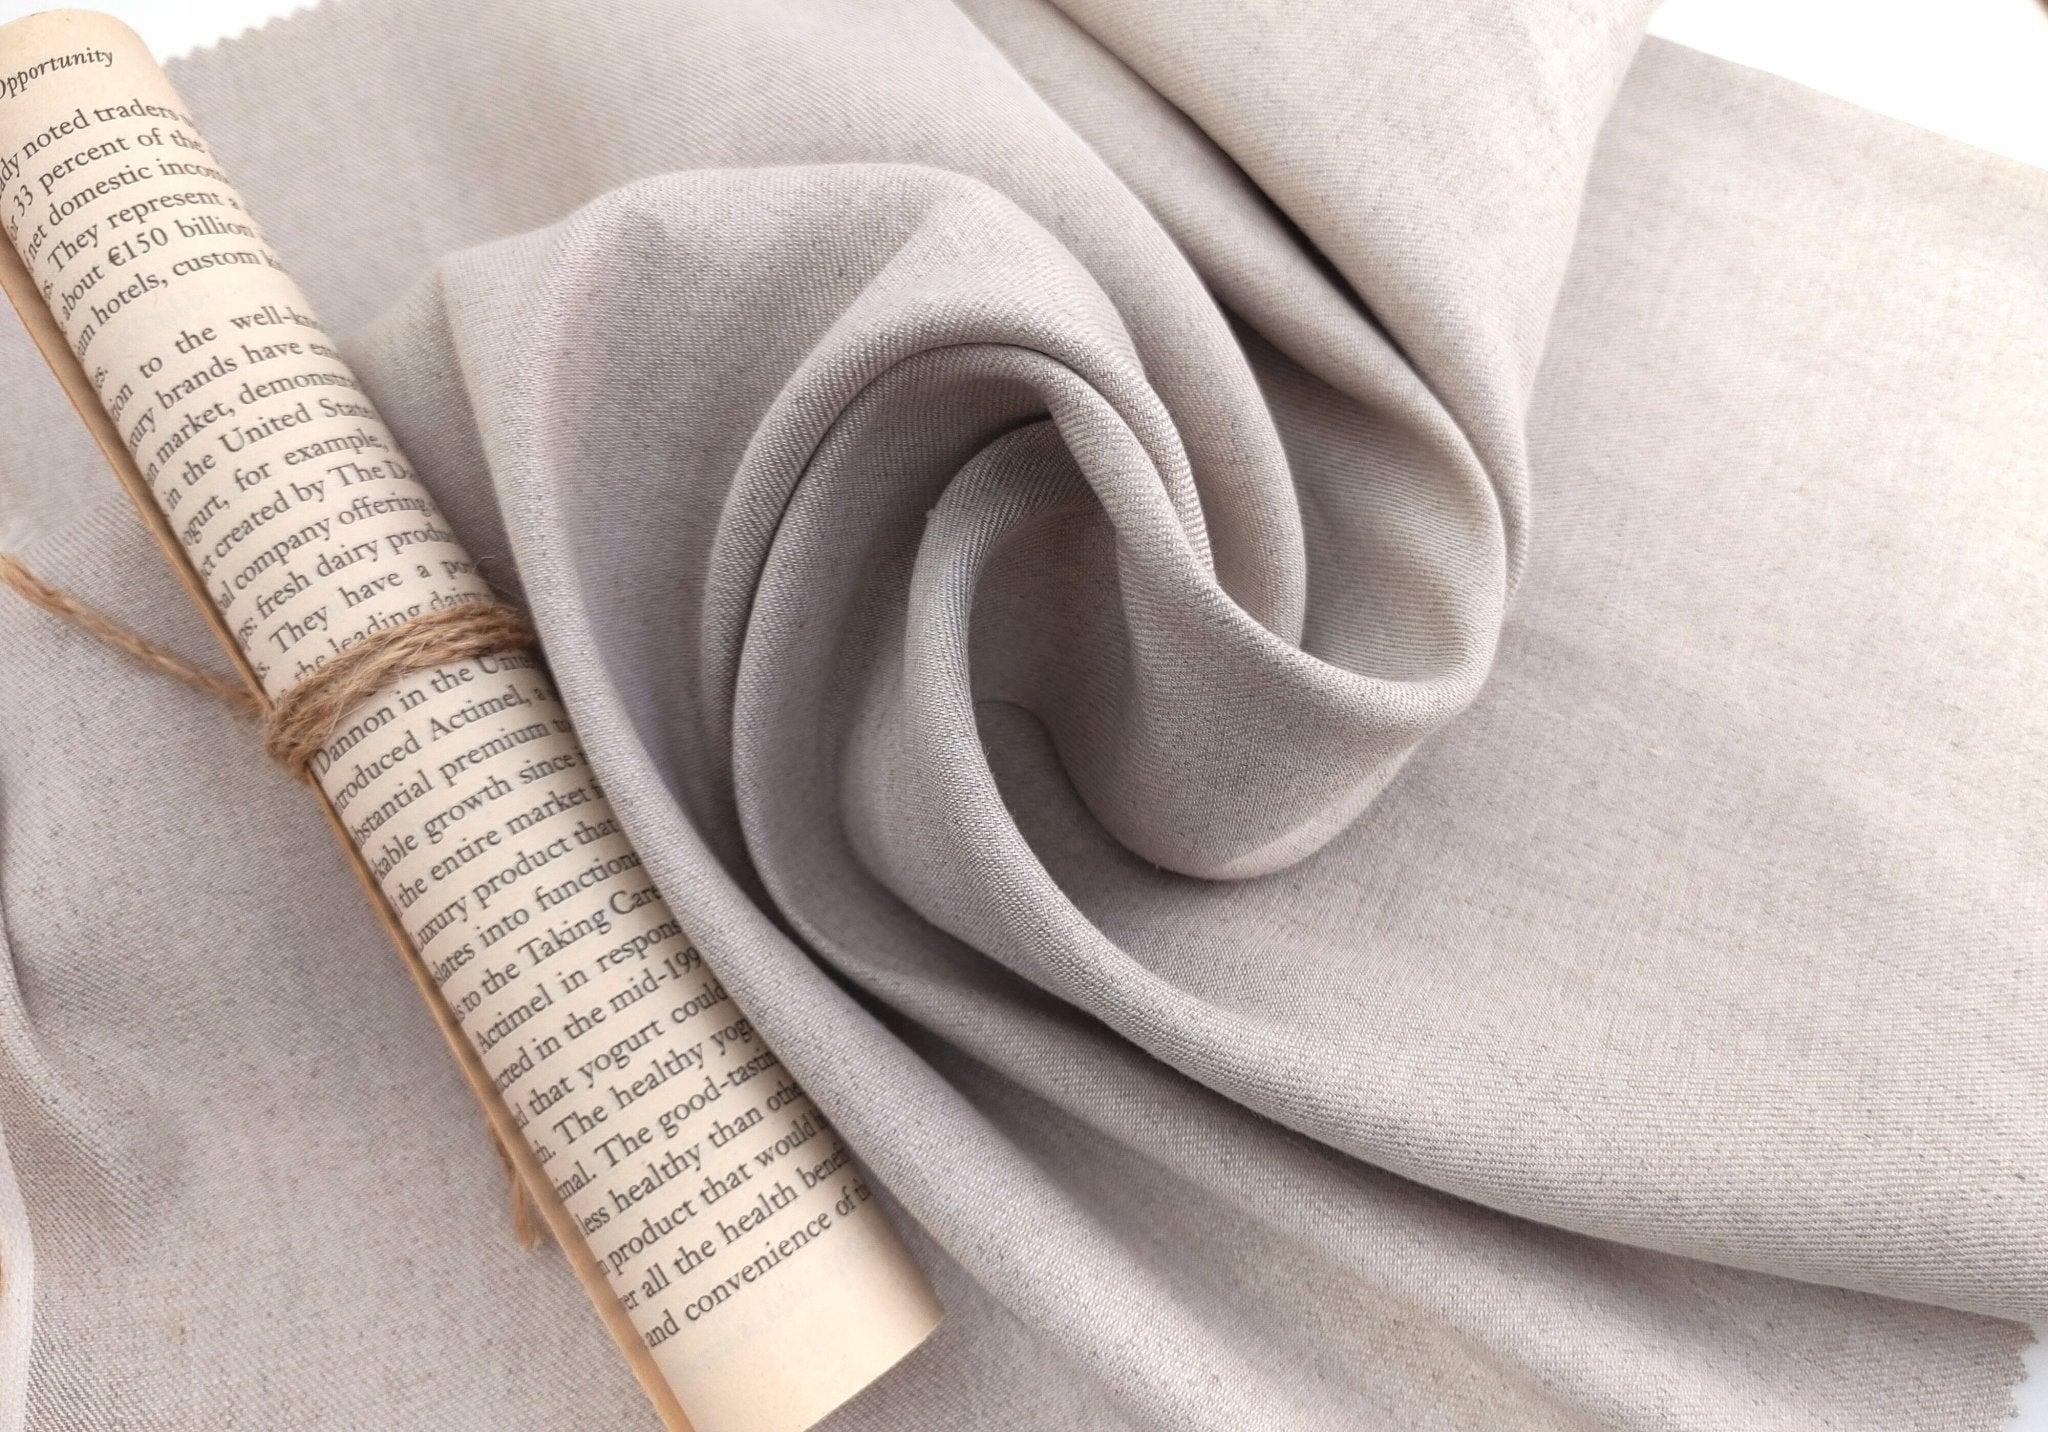 Simple Duo: Two-Tone Chambray Linen Twill Stretch Fabric 3201 4949 6504 - The Linen Lab - Brown